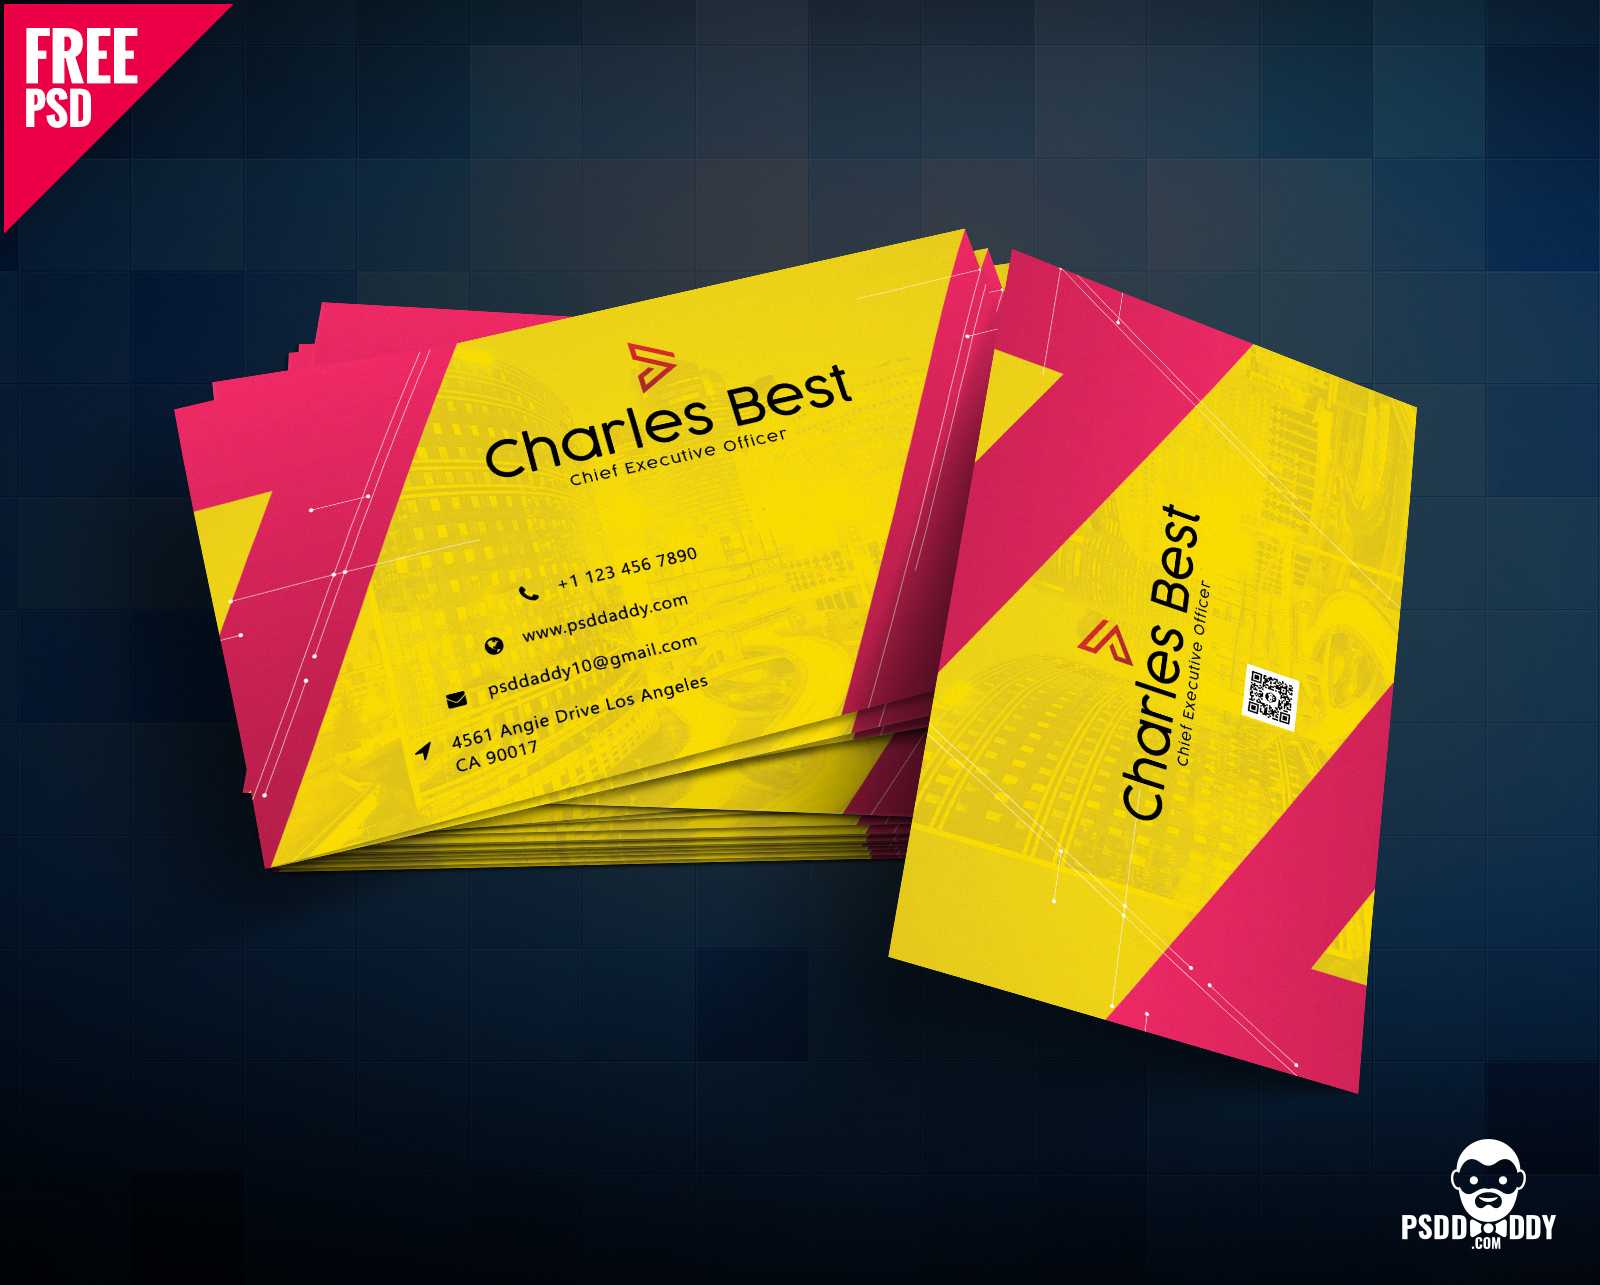 Download] Creative Business Card Free Psd | Psddaddy Throughout Creative Business Card Templates Psd